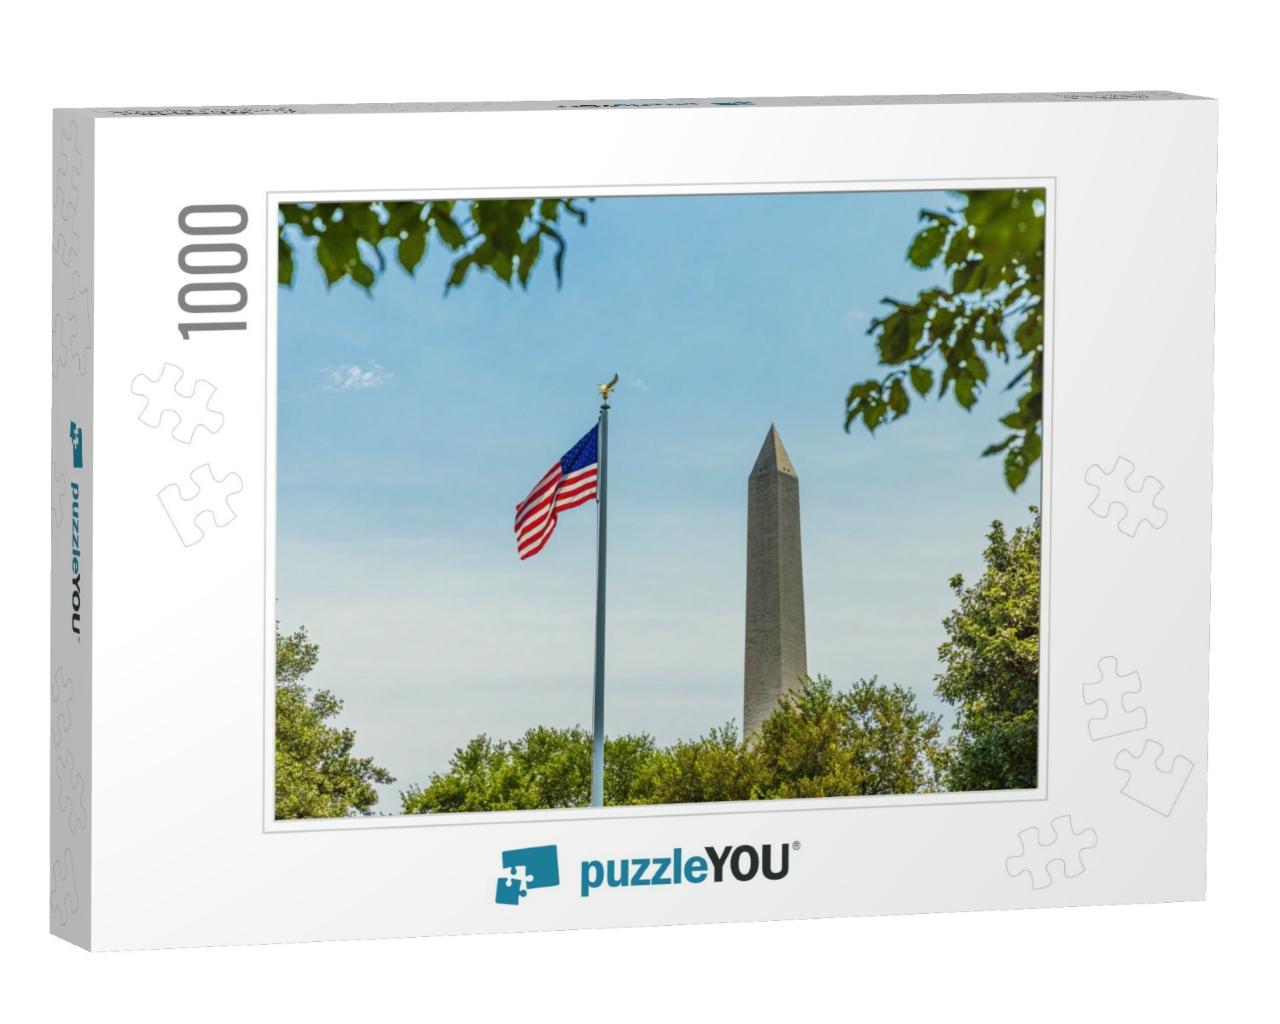 Washington Monument with American Flag, Washington Dc... Jigsaw Puzzle with 1000 pieces